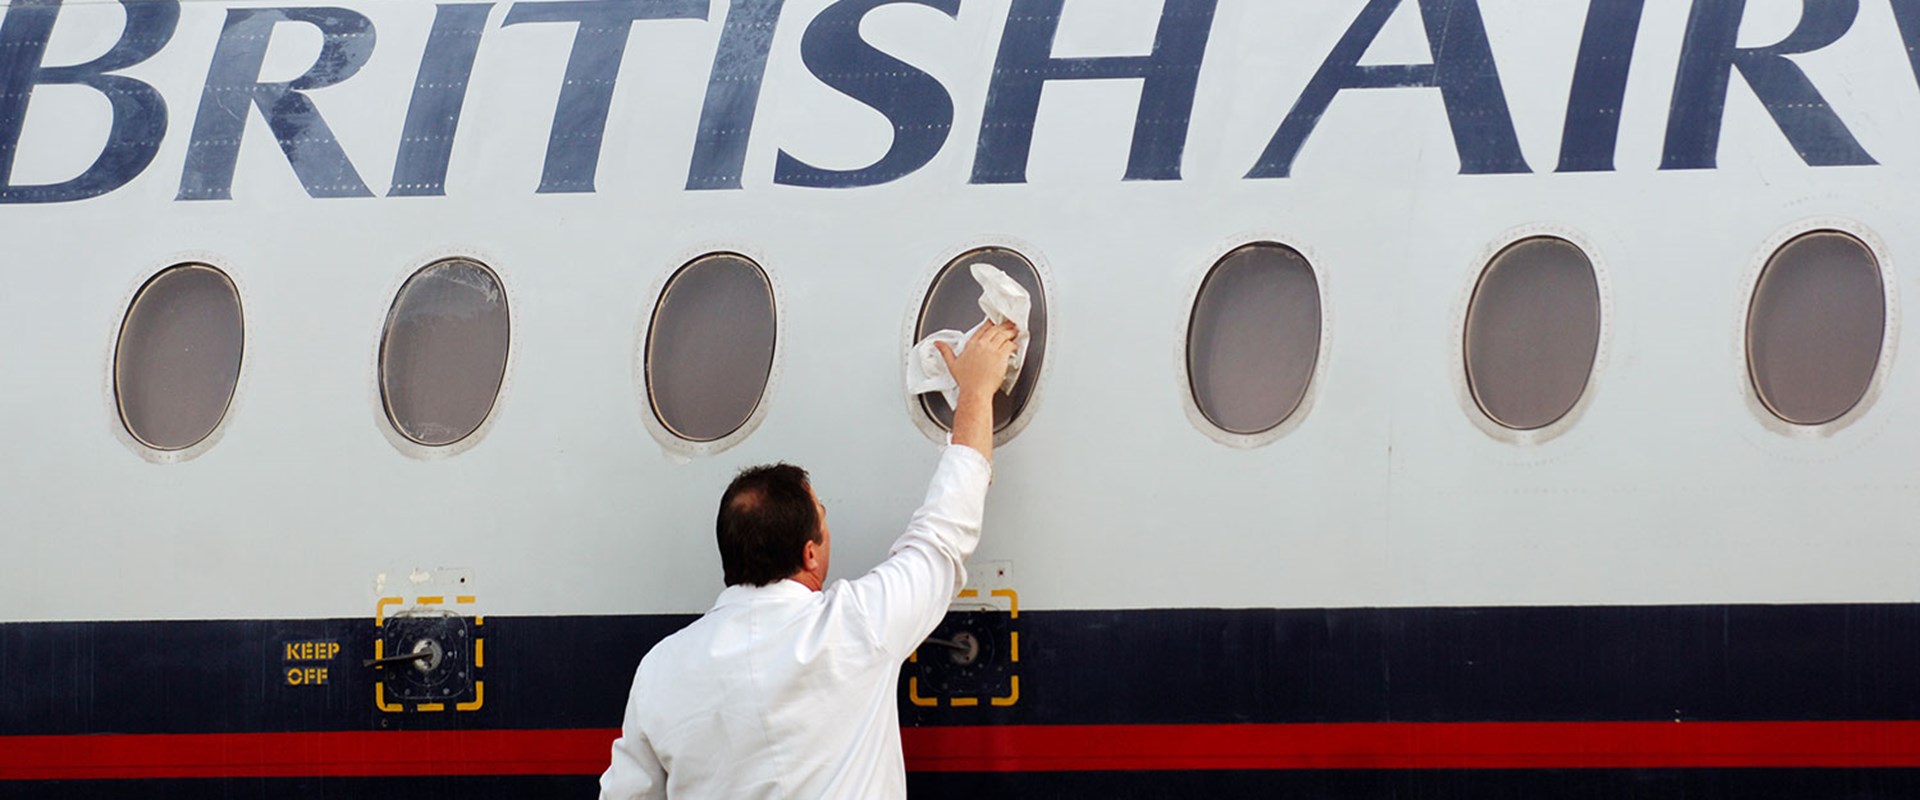 A man reaches up to clean the outside of a passenger window of a British Airways plane.